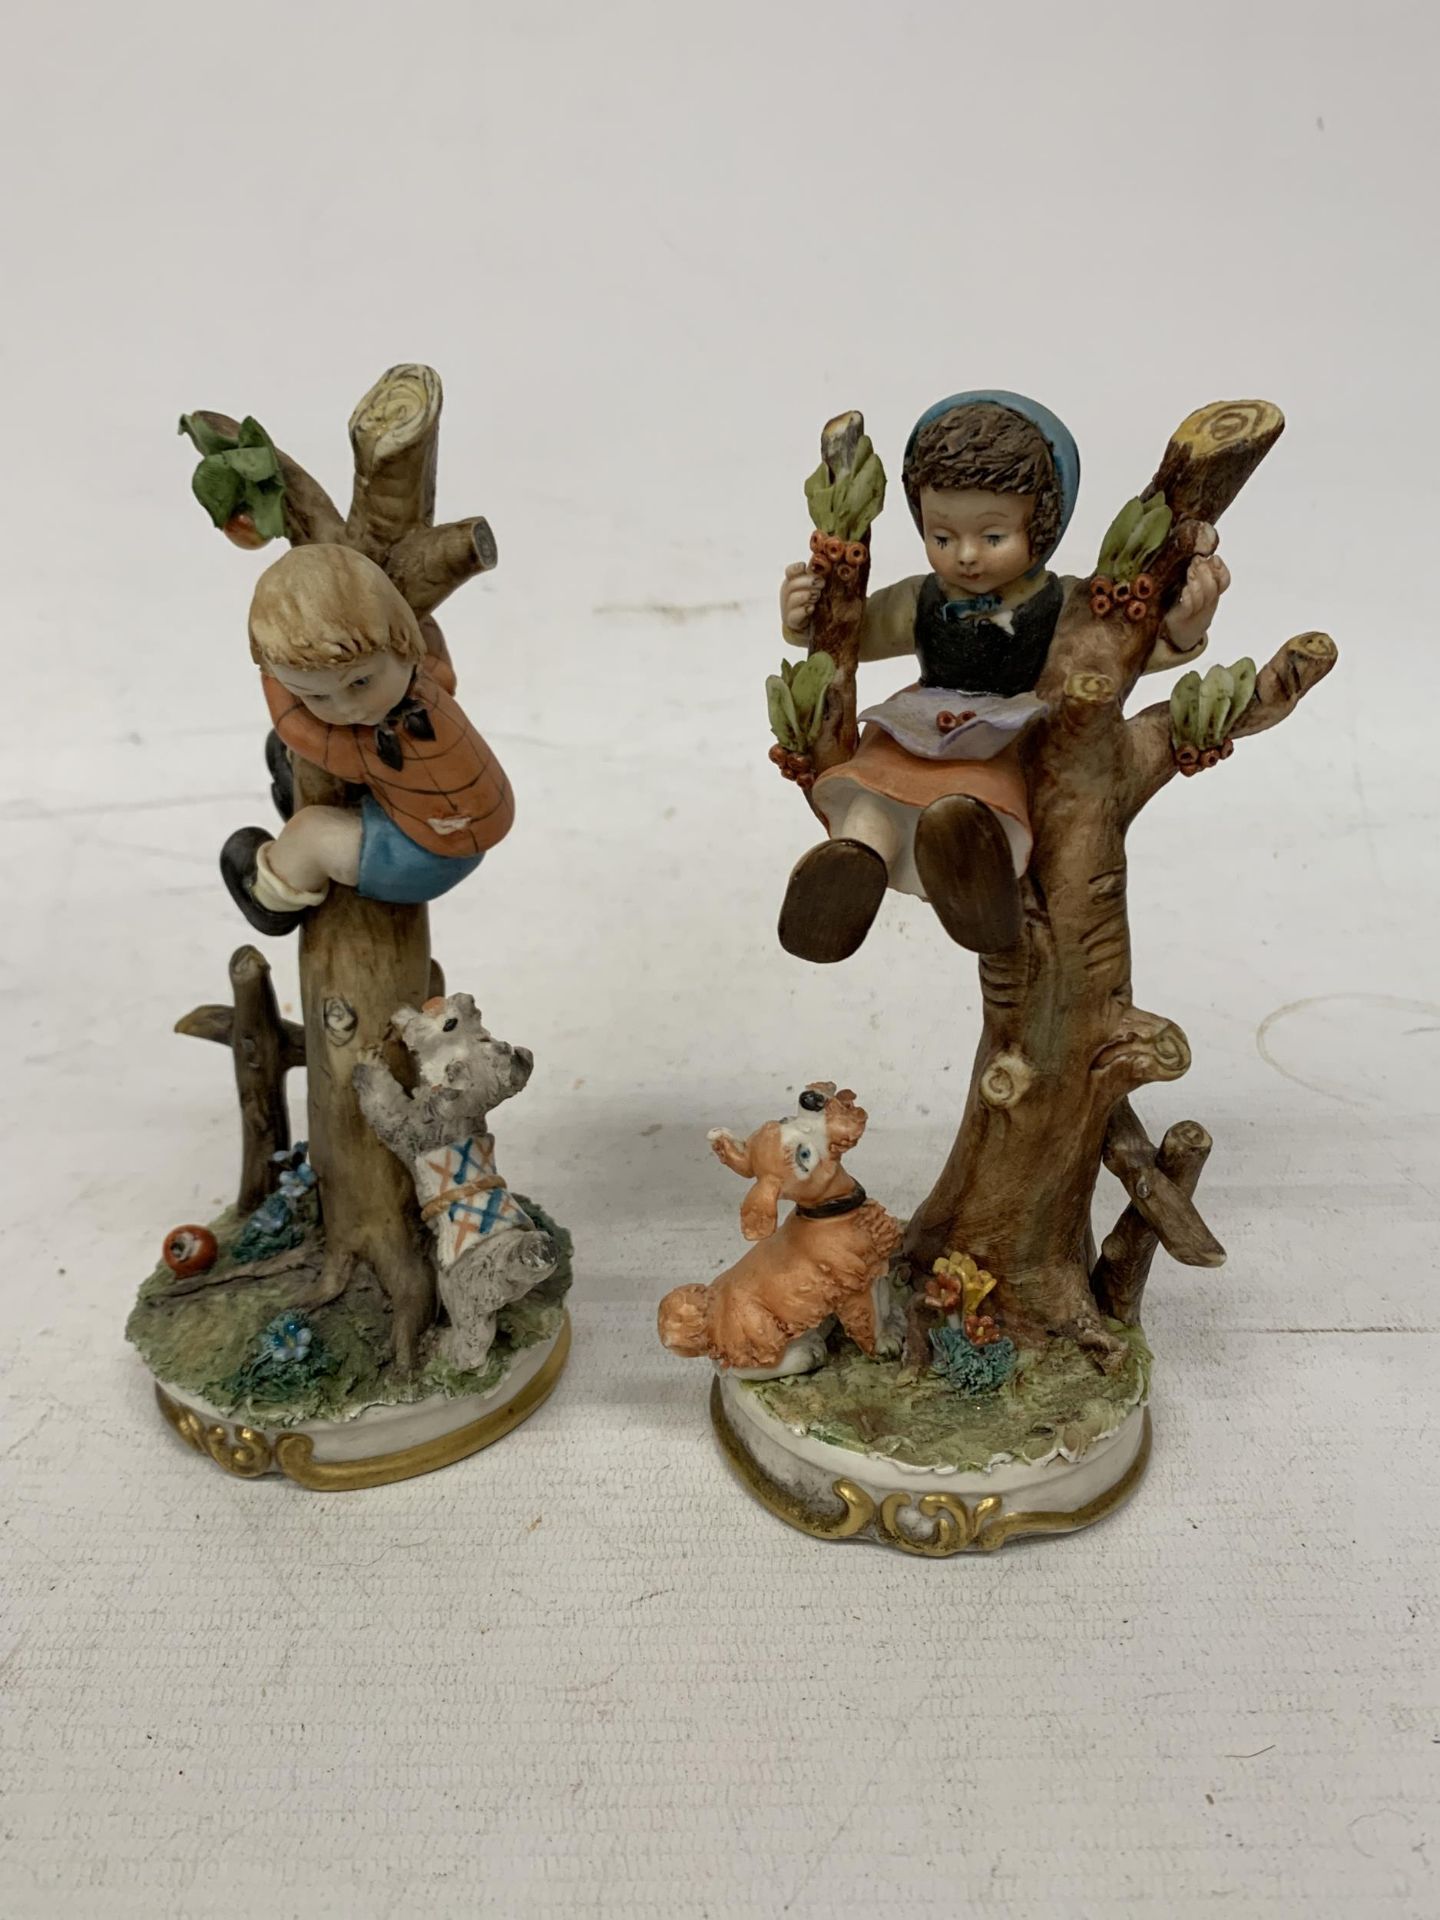 TWO CAPODIAMONTE FIGURES OF A GIRL AND A BOY IN A TREE WITH A DOG BARKING BELOW